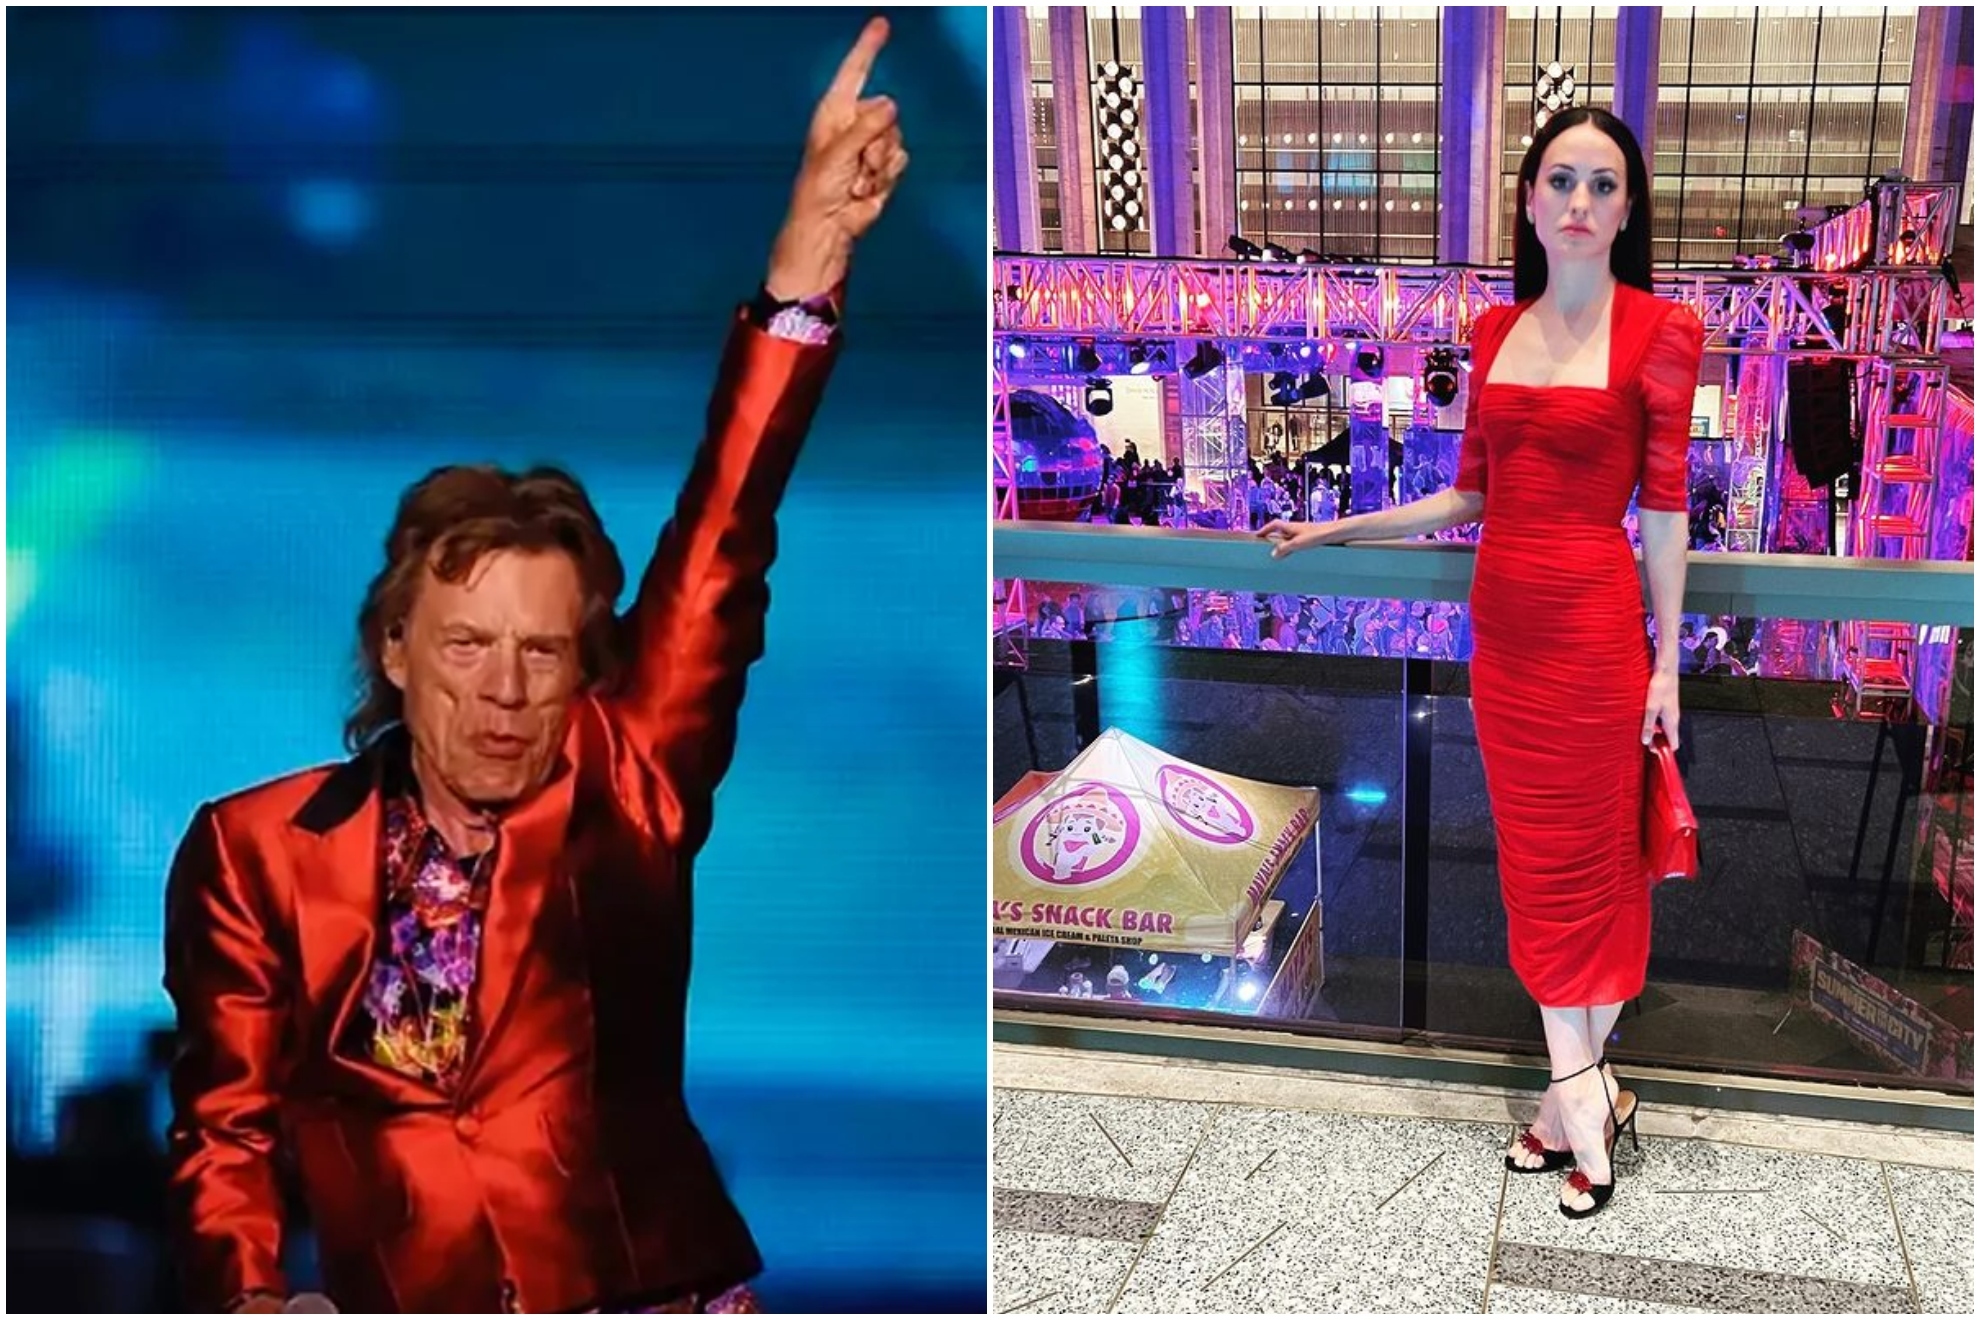 Mick Jagger will get married at 79 years old to his 36-year-old ...